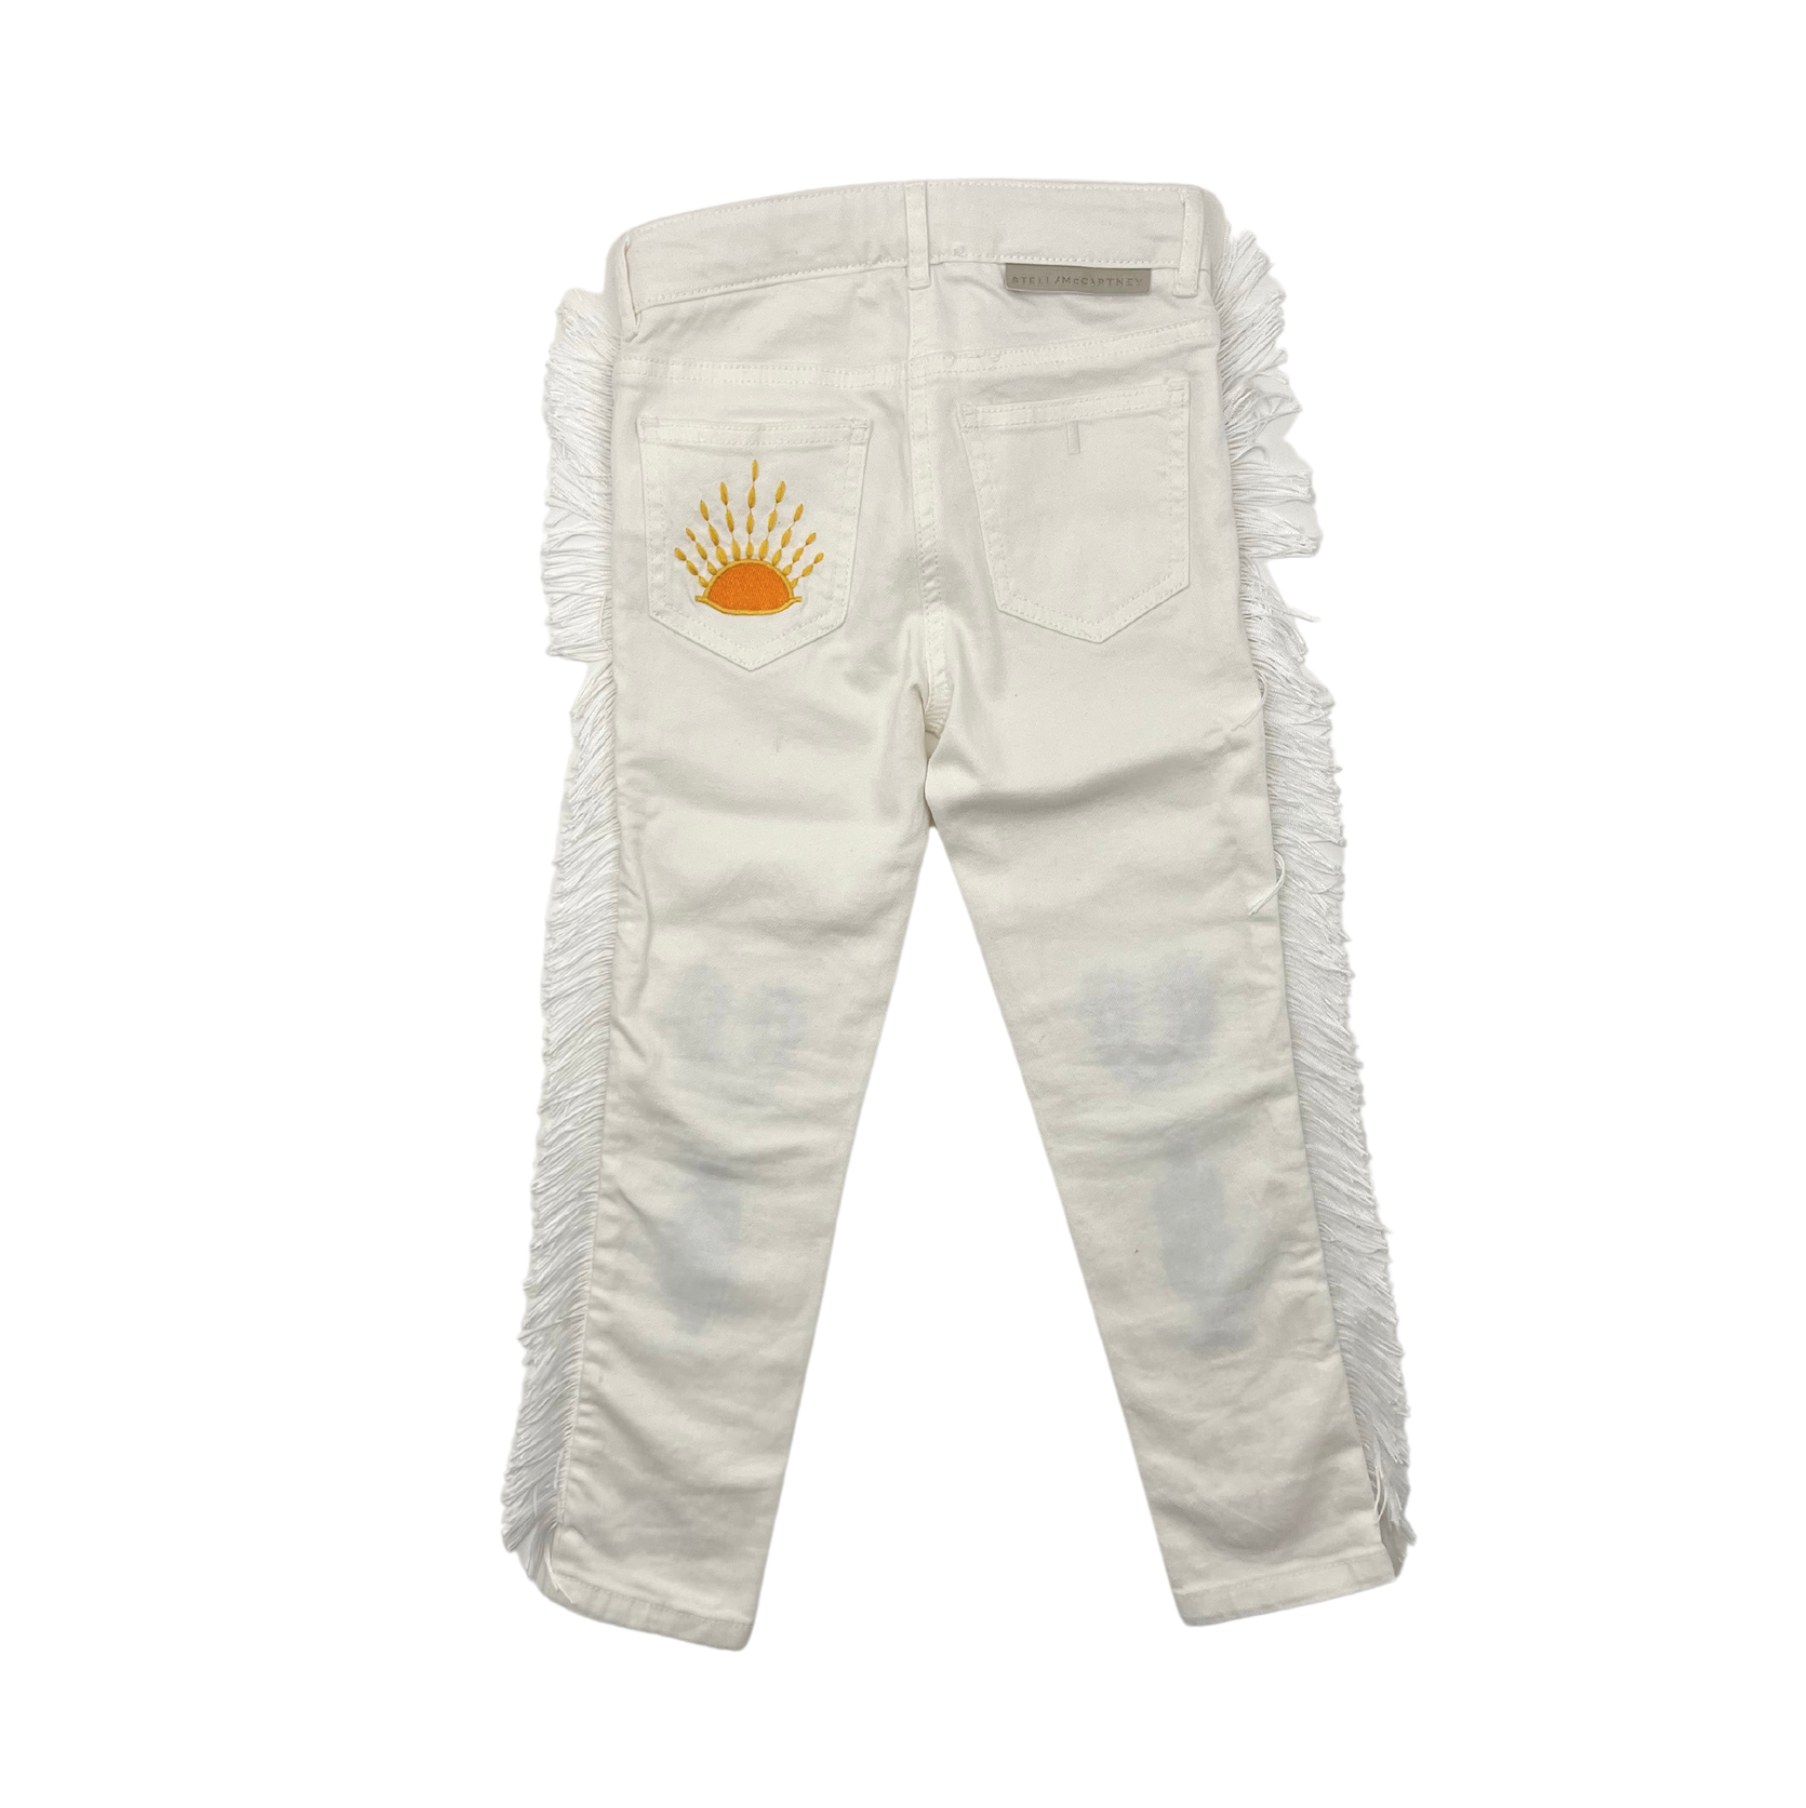 STELLA MCCARTNEY - Fringed jeans - 6 years old